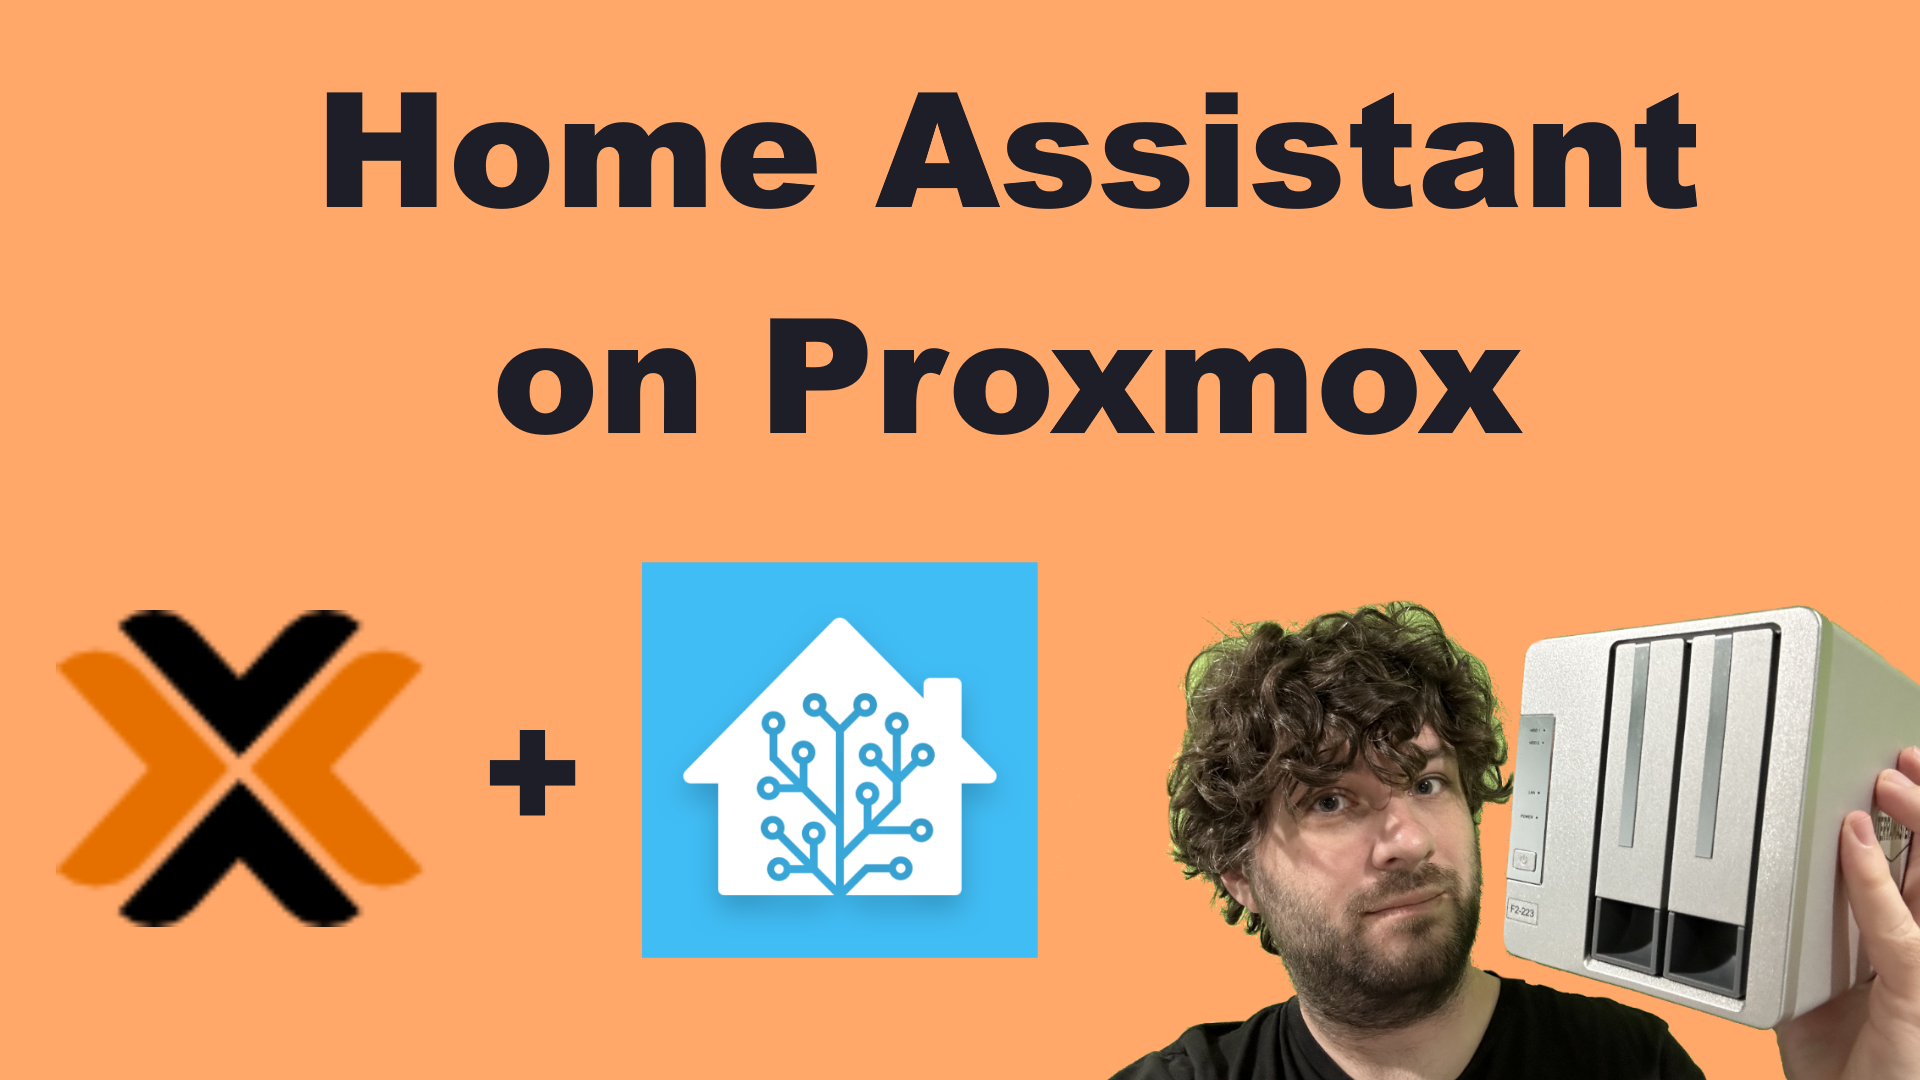 Installing Home Assistant on Proxmox